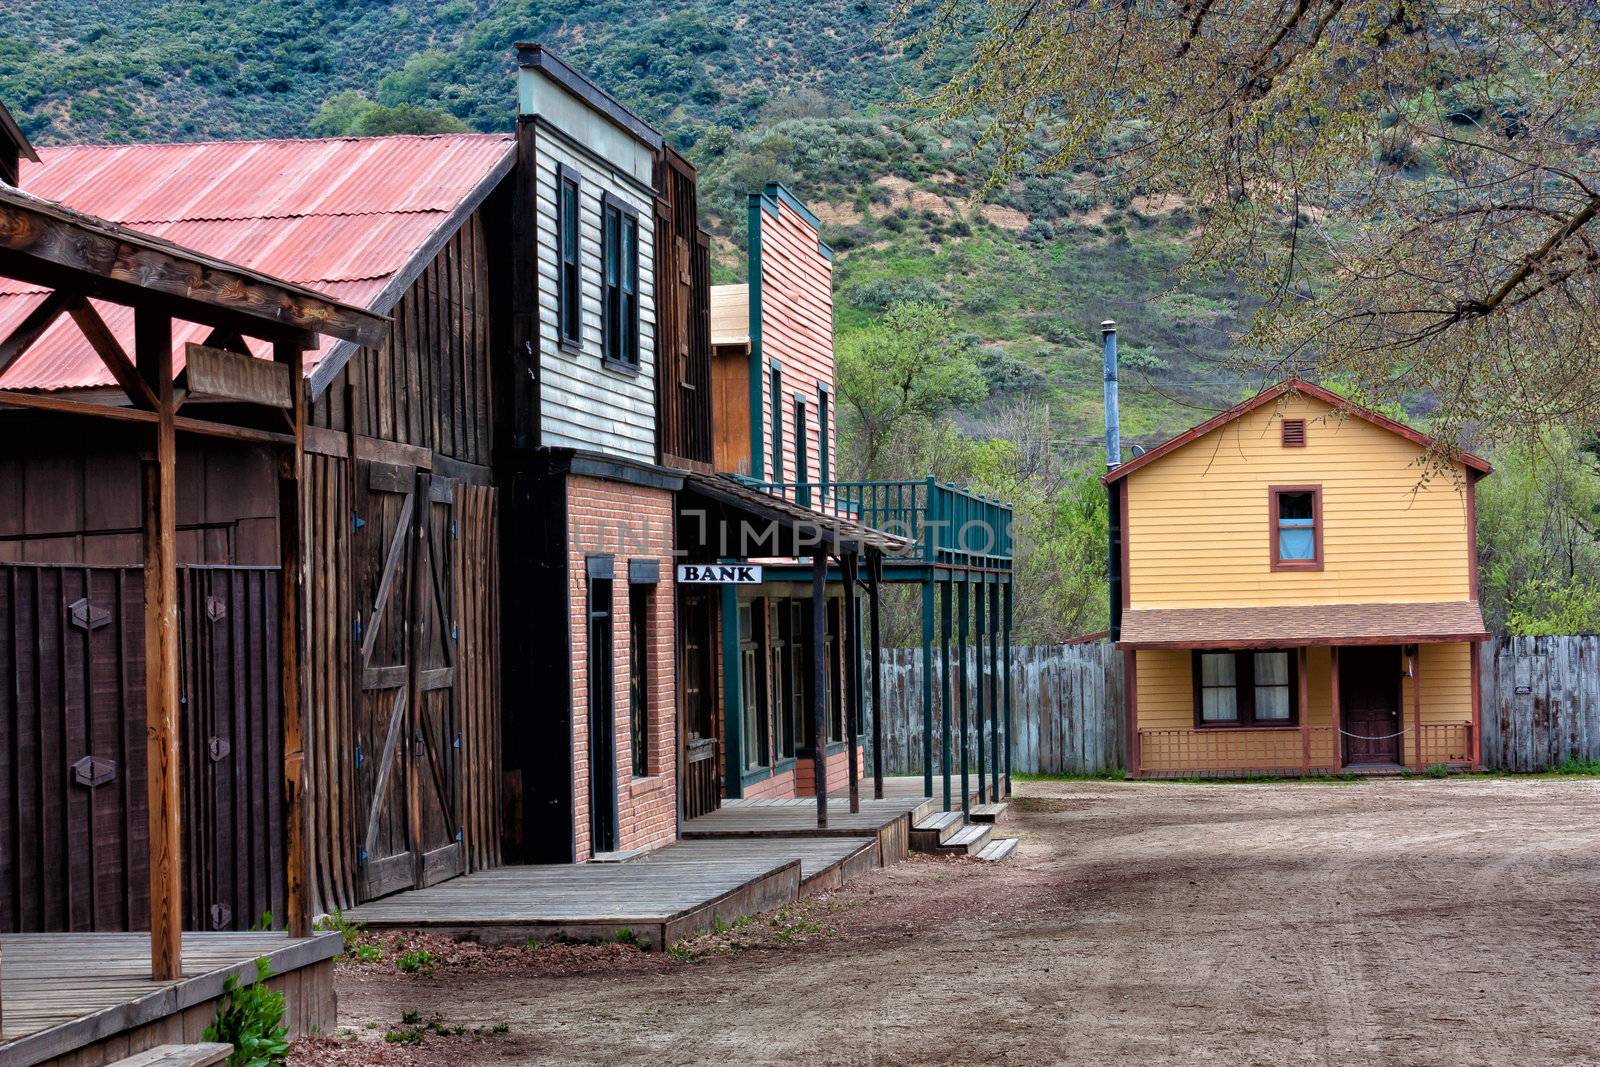 An old western town in California.